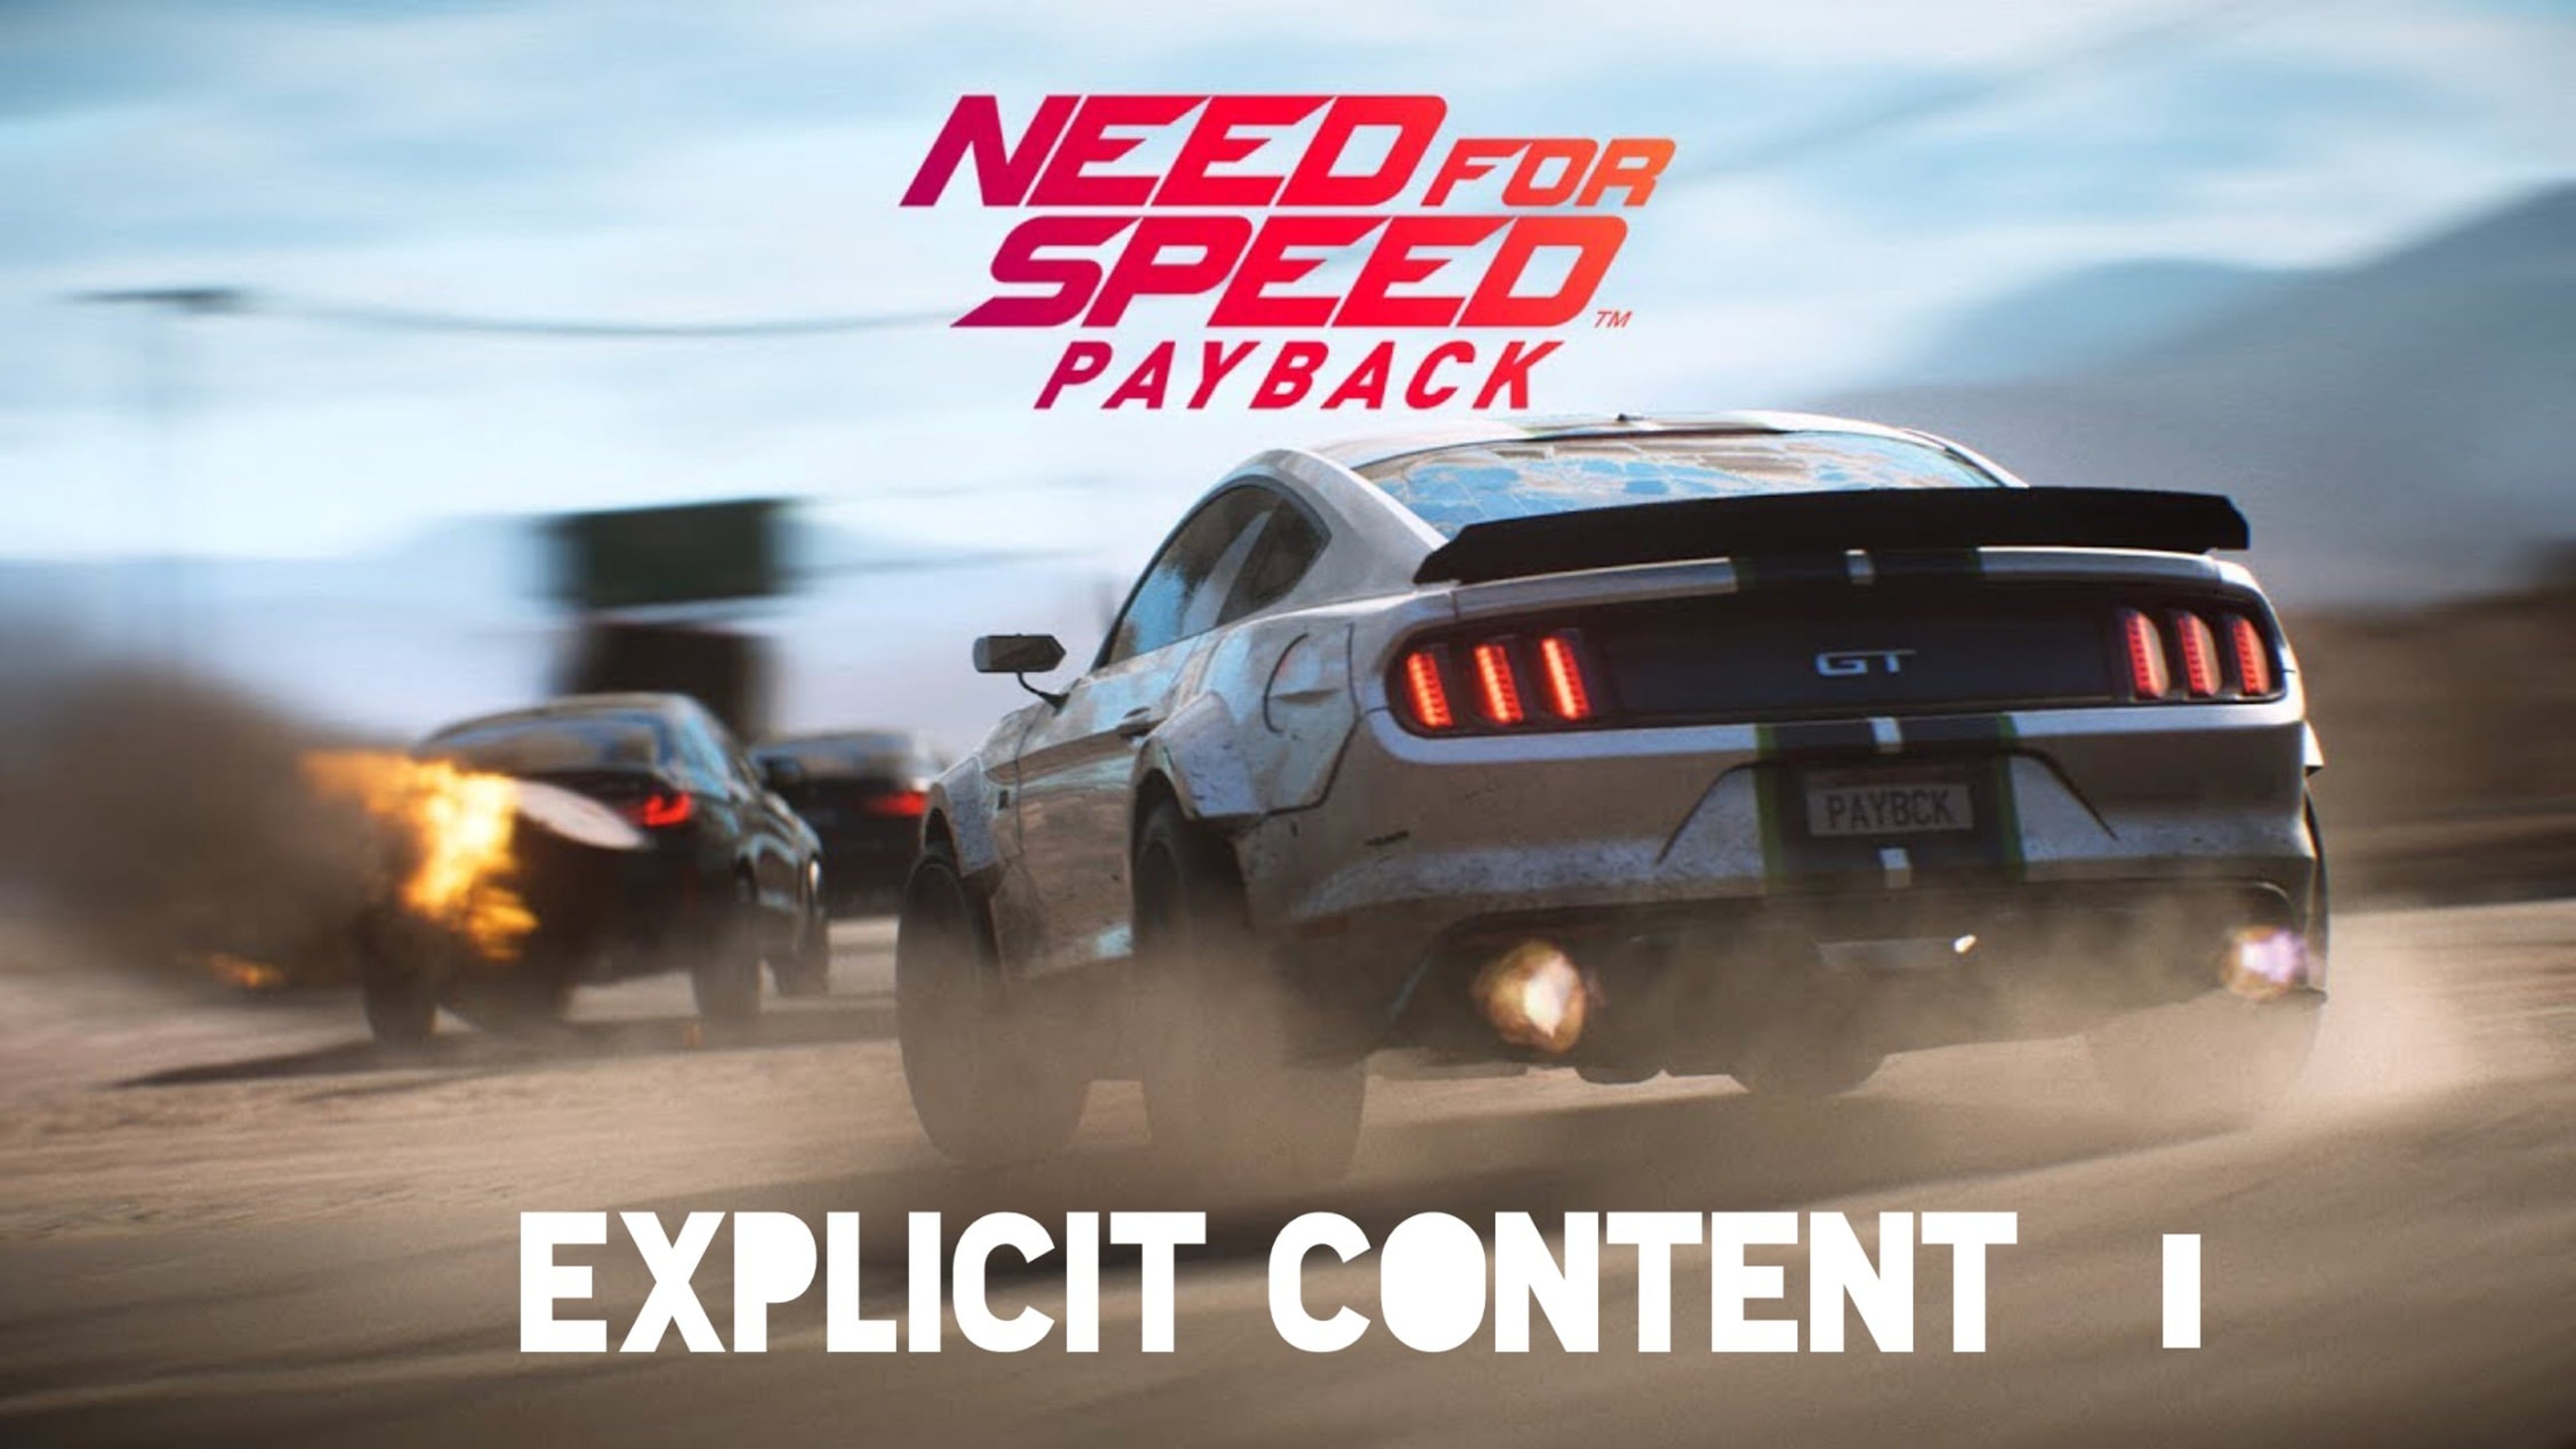 Explicit Content : Need for speed Payback Cover